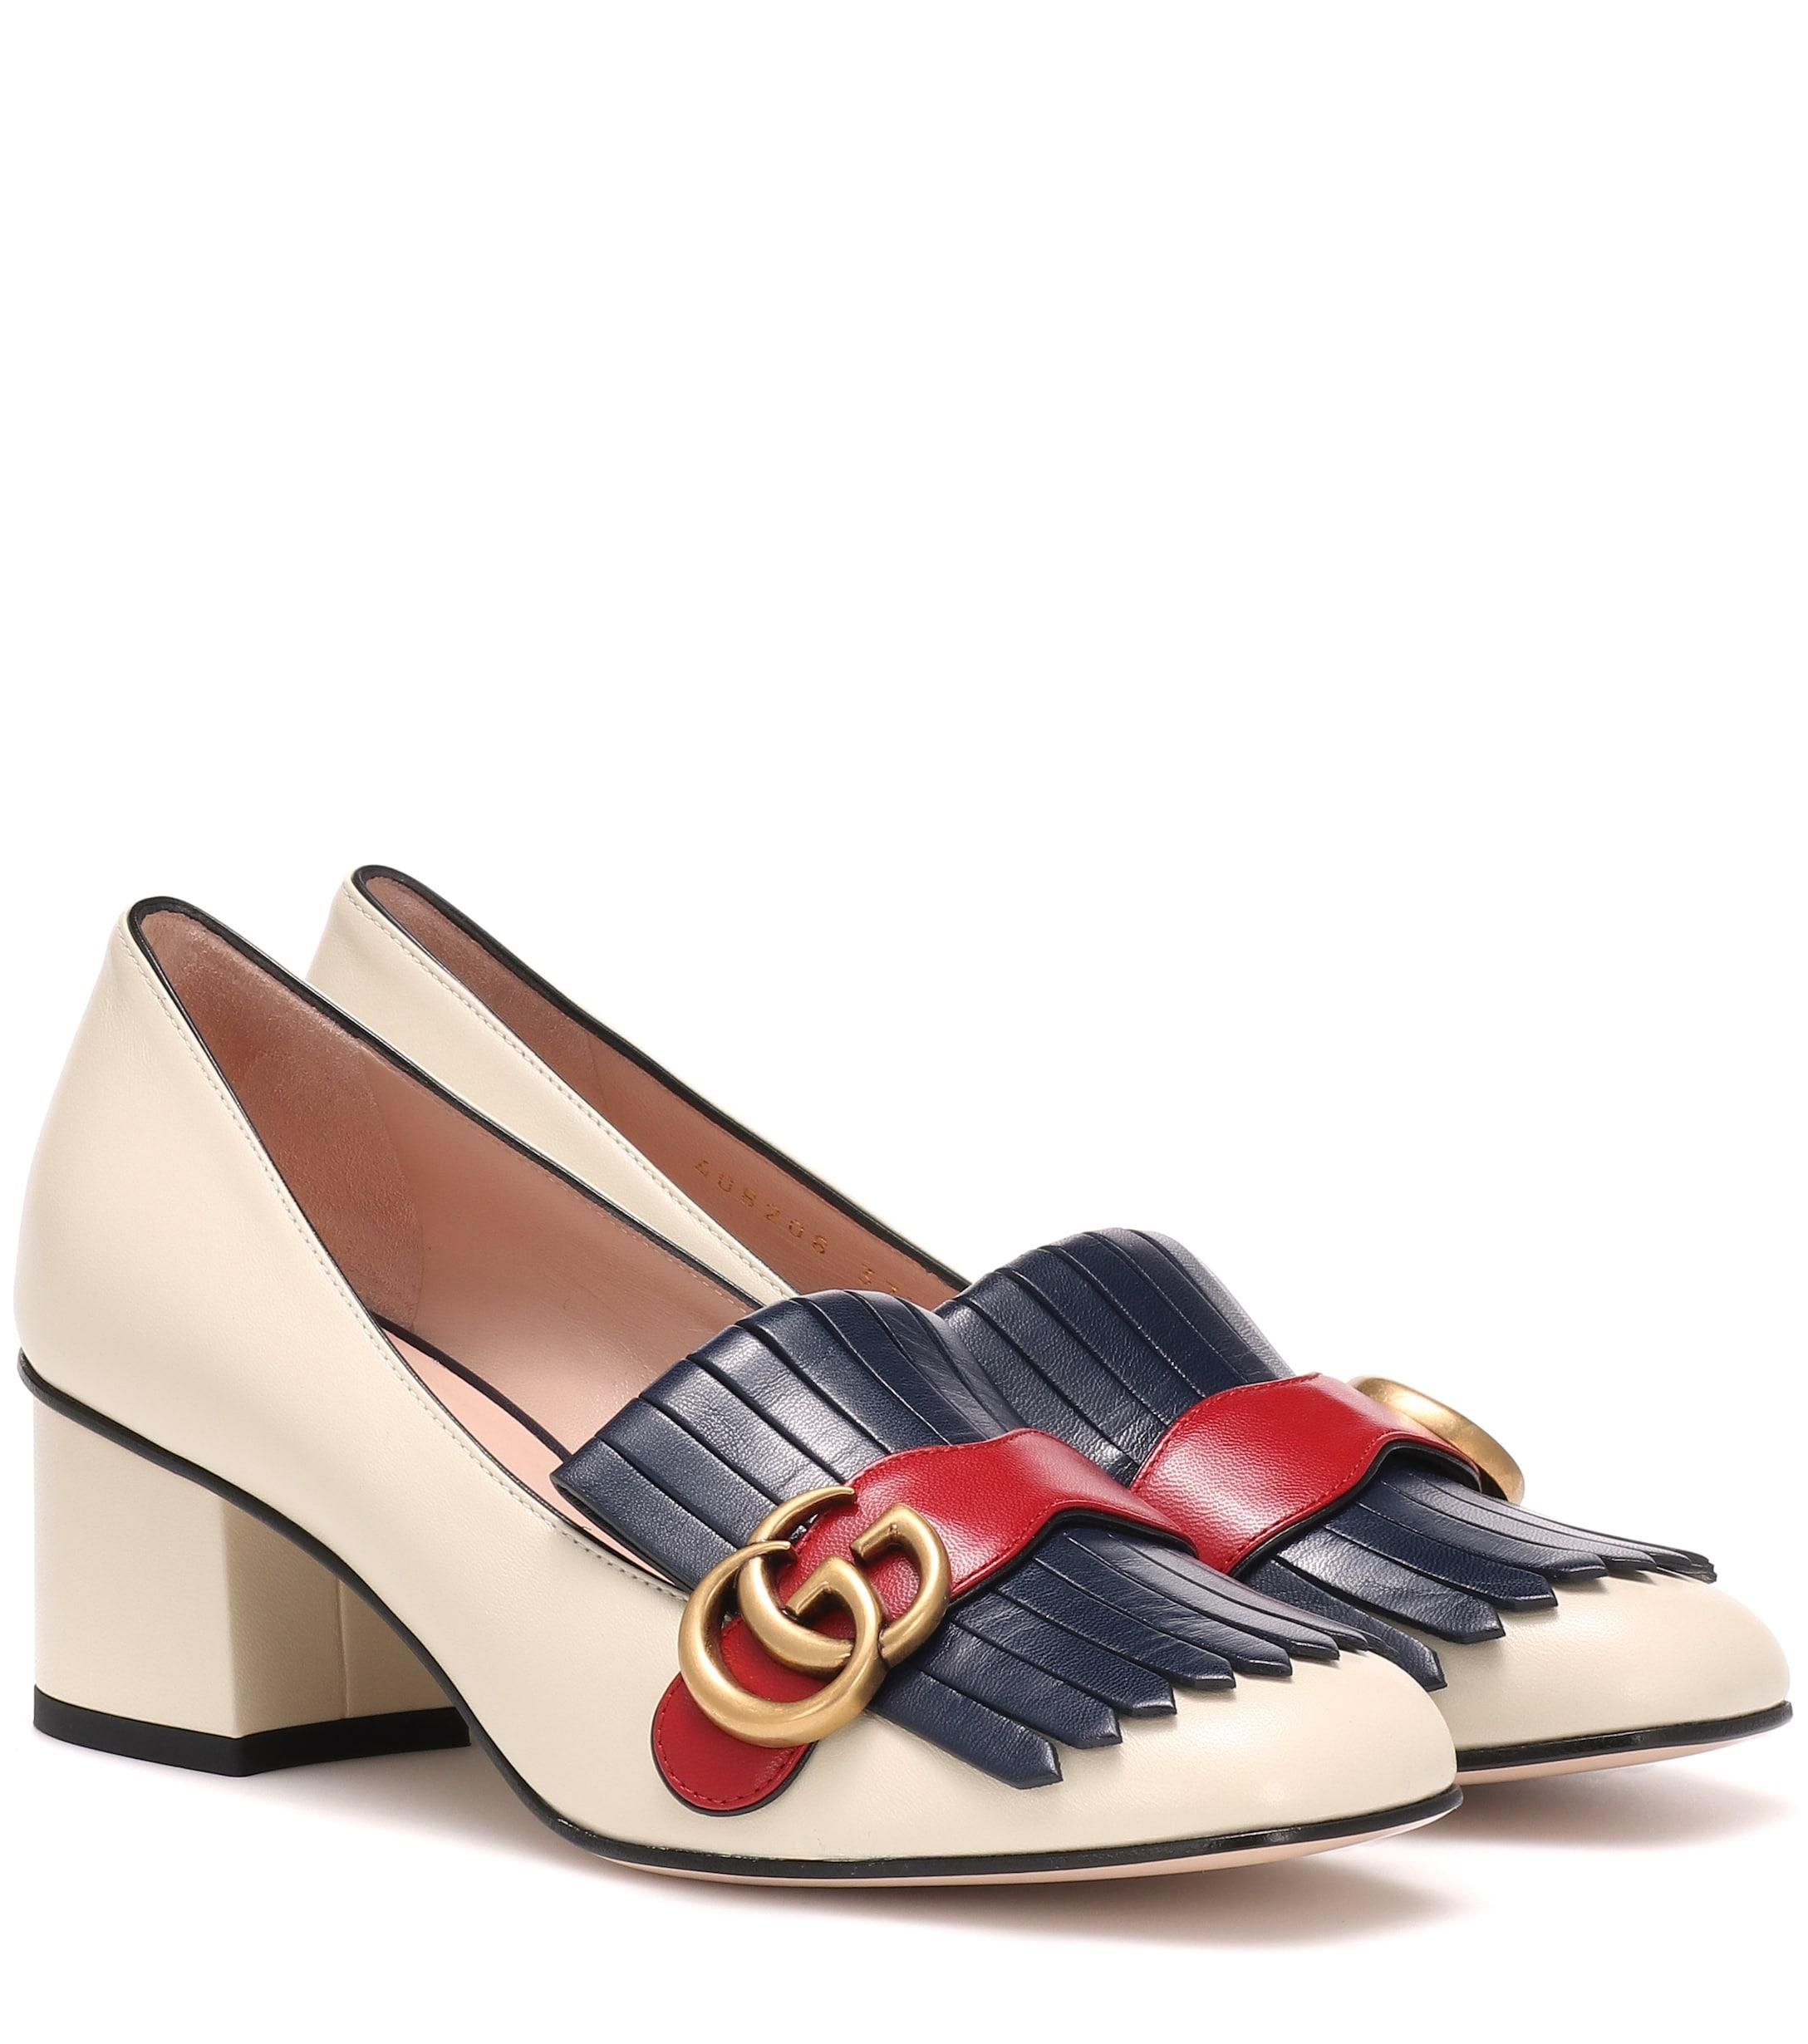 Gucci Marmont Leather Loafer Pumps in White - Lyst